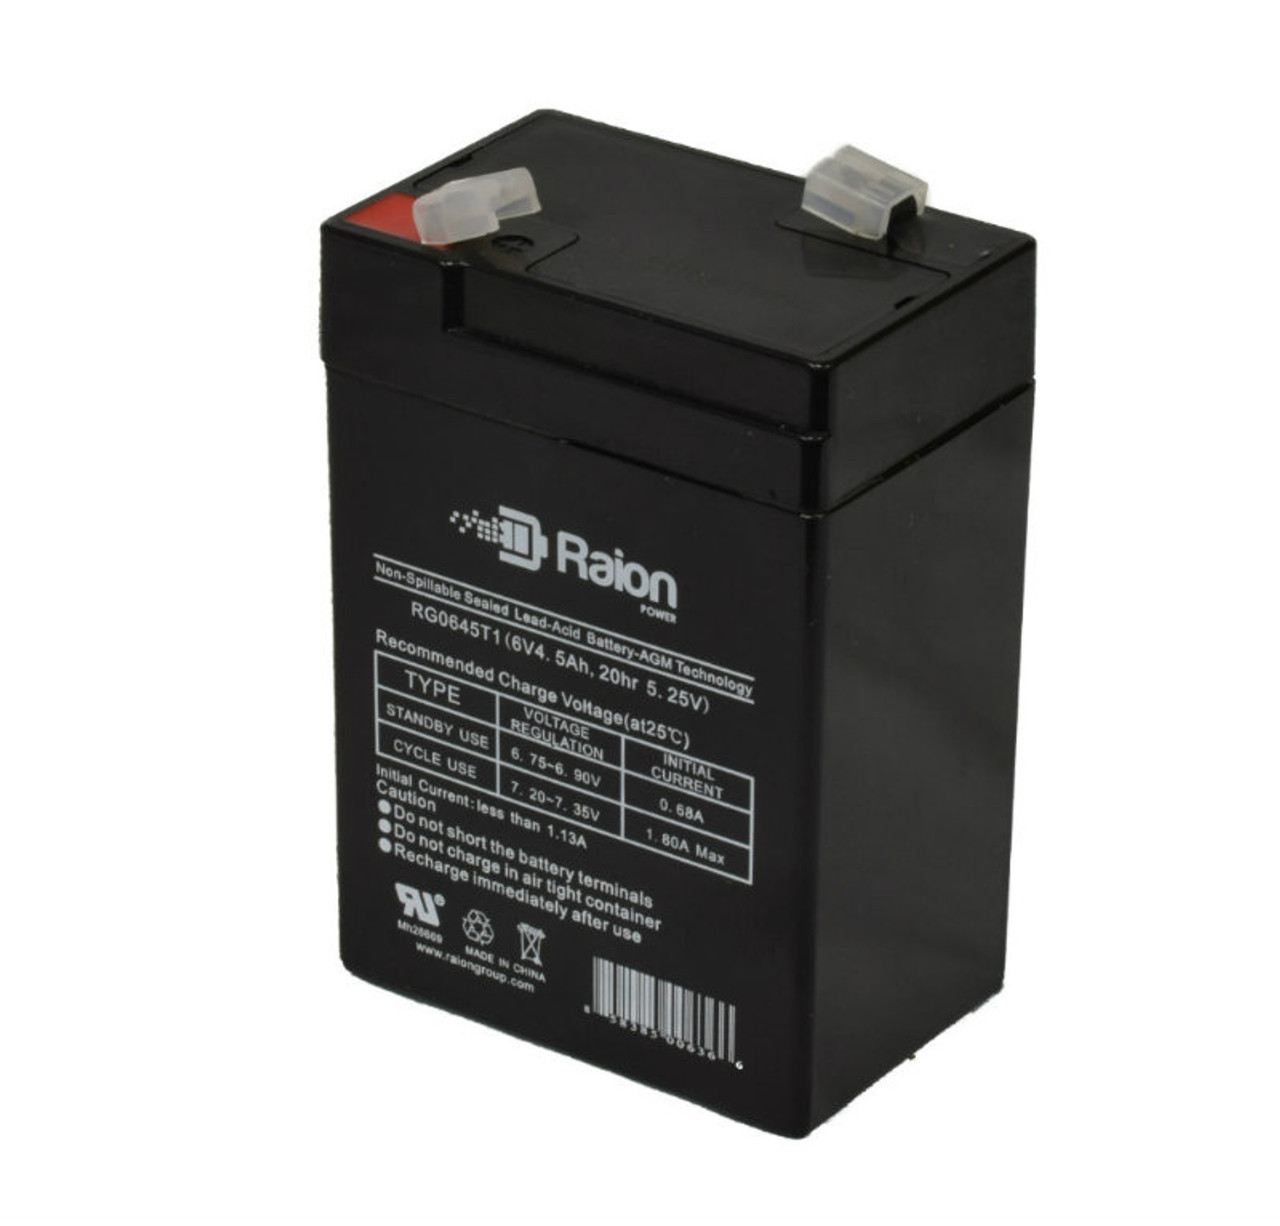 Raion Power RG0645T1 6V 4.5Ah Replacement Battery Cartridge for Long Way LW-3FM4.5